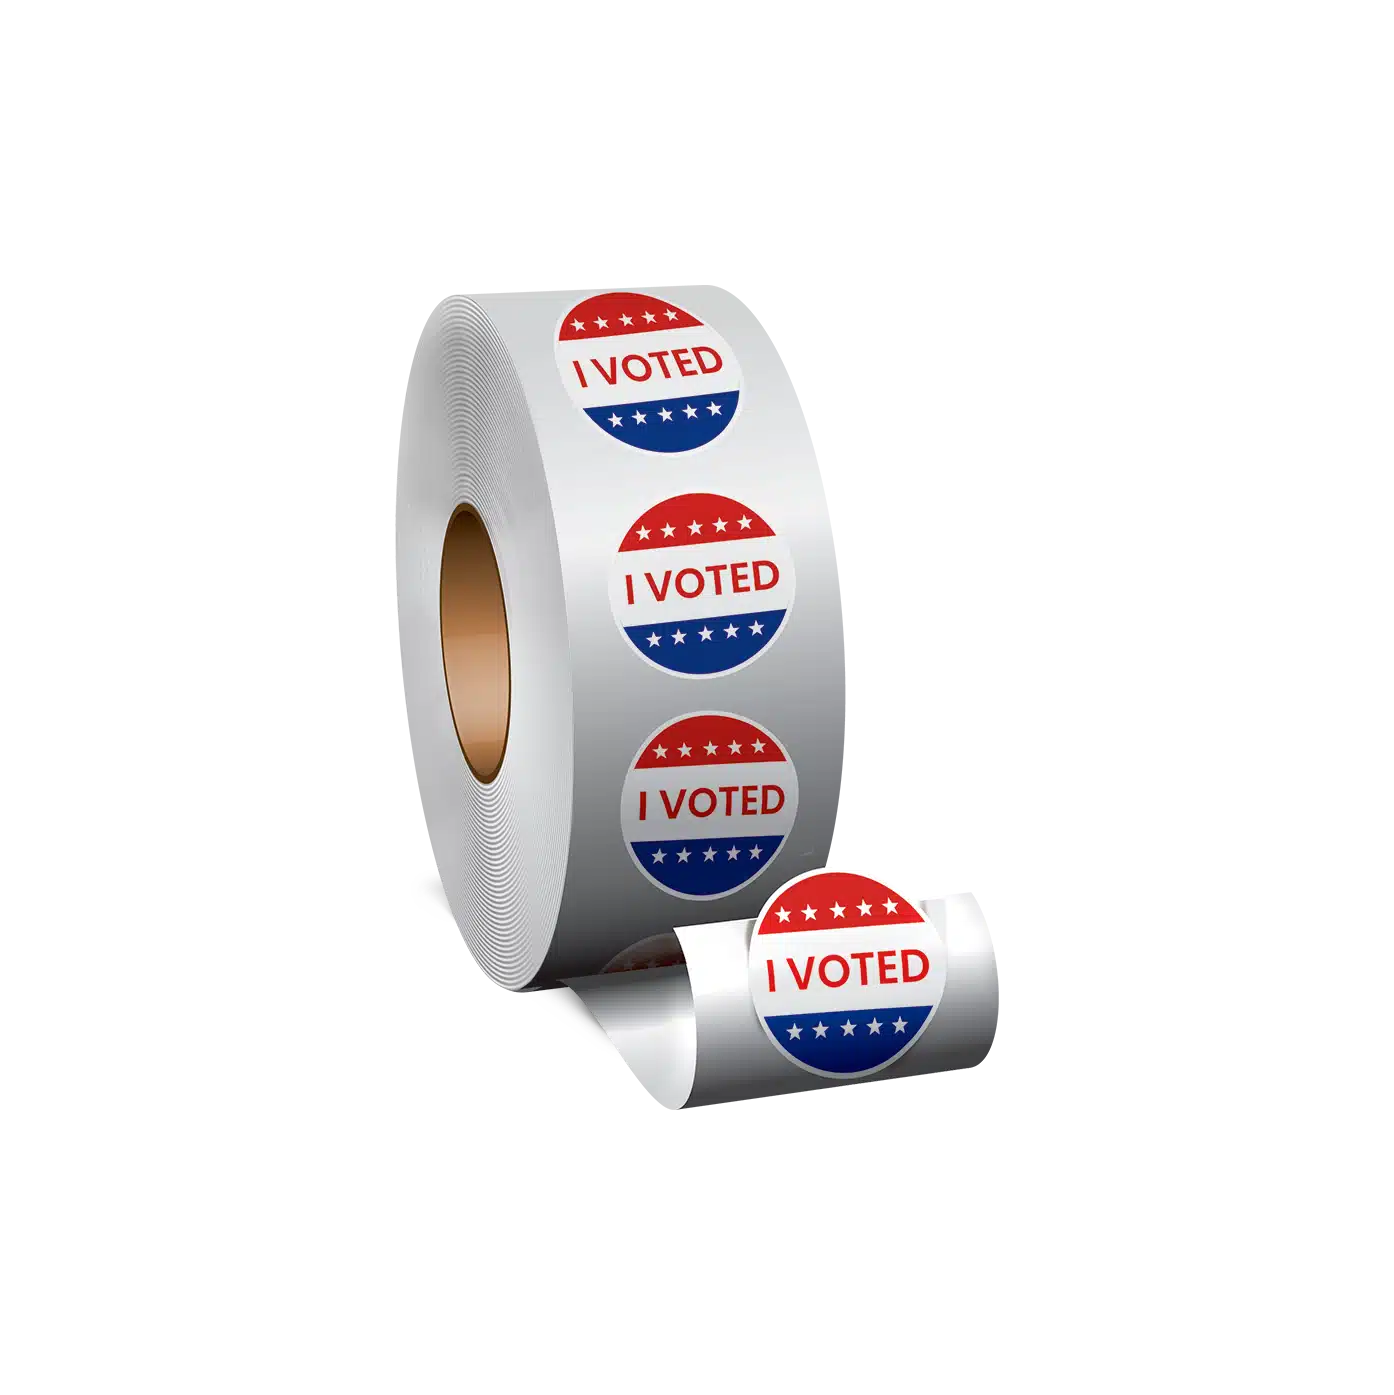 roll-labels-political-campaign